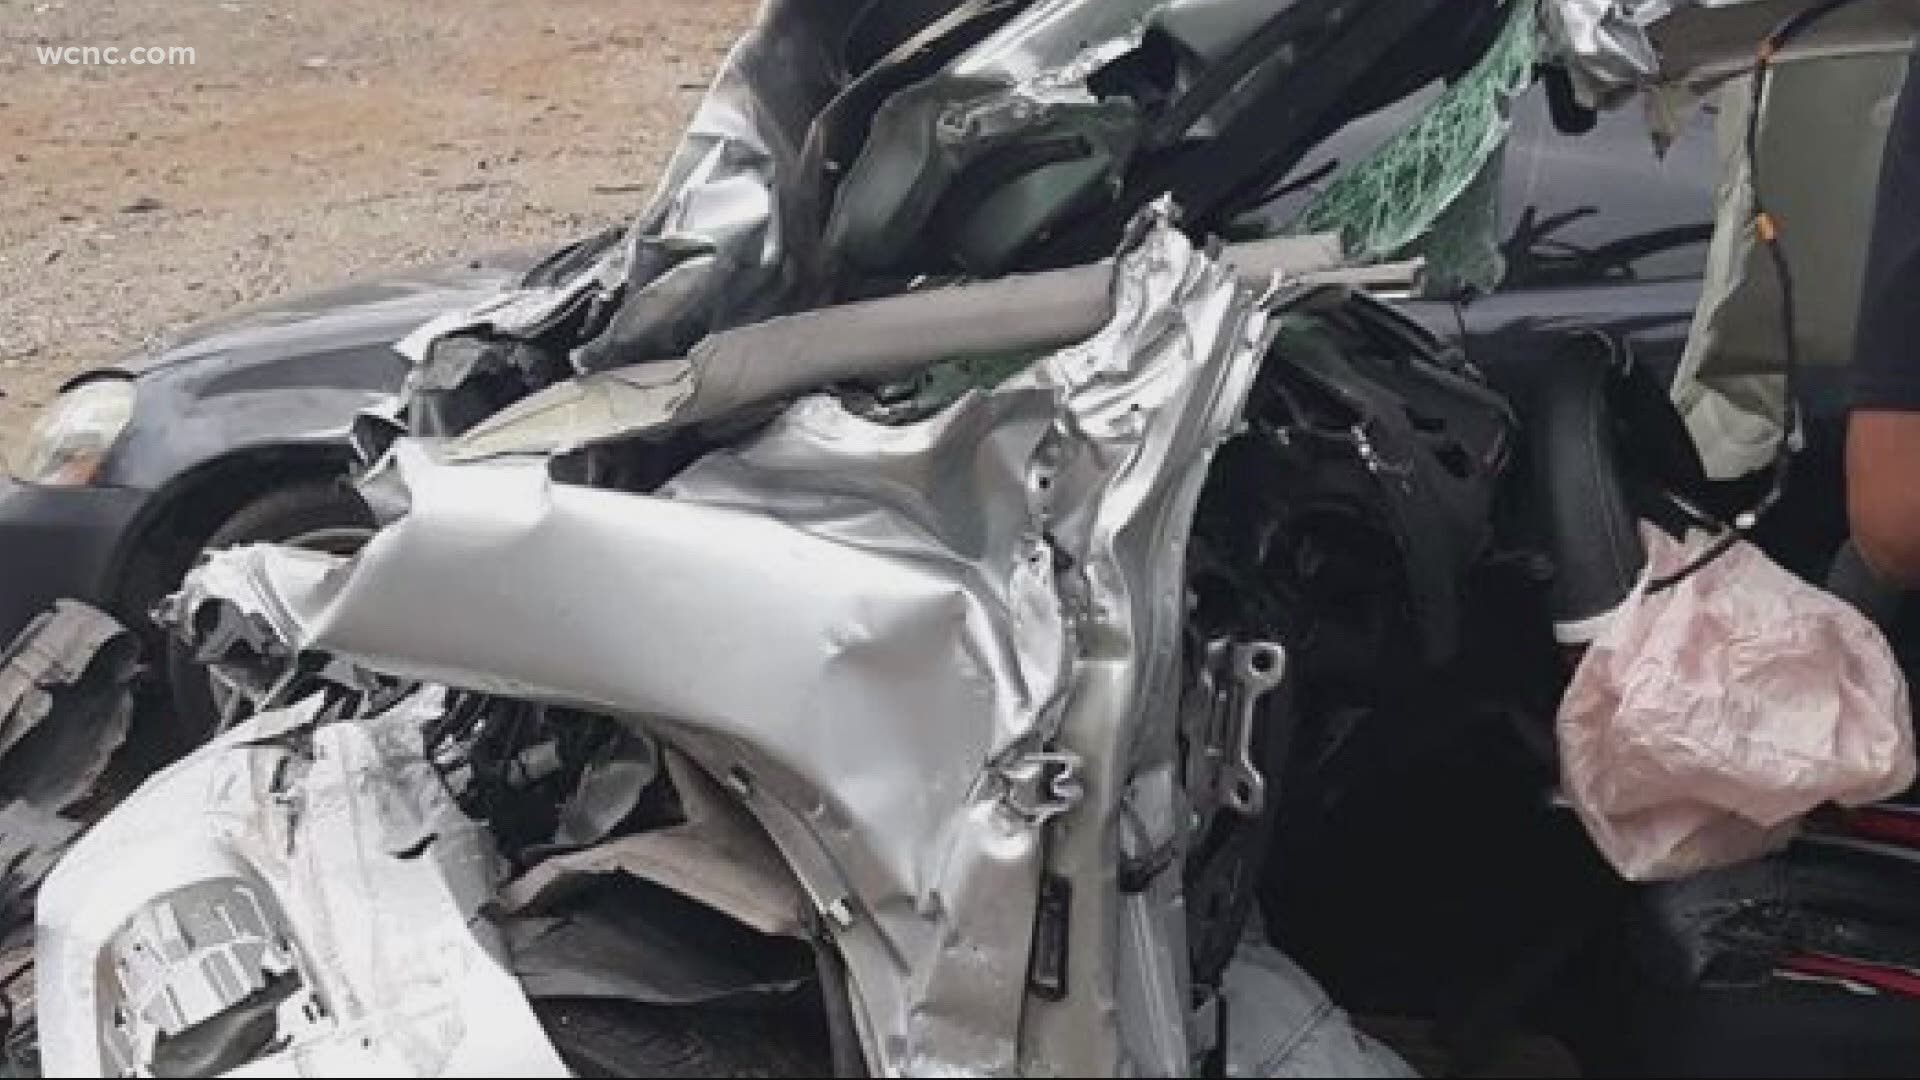 North Carolina State Highway Patrol says last Monday Nelson collided with a tractor-trailer causing him to be rushed to the hospital with severe brain injuries.